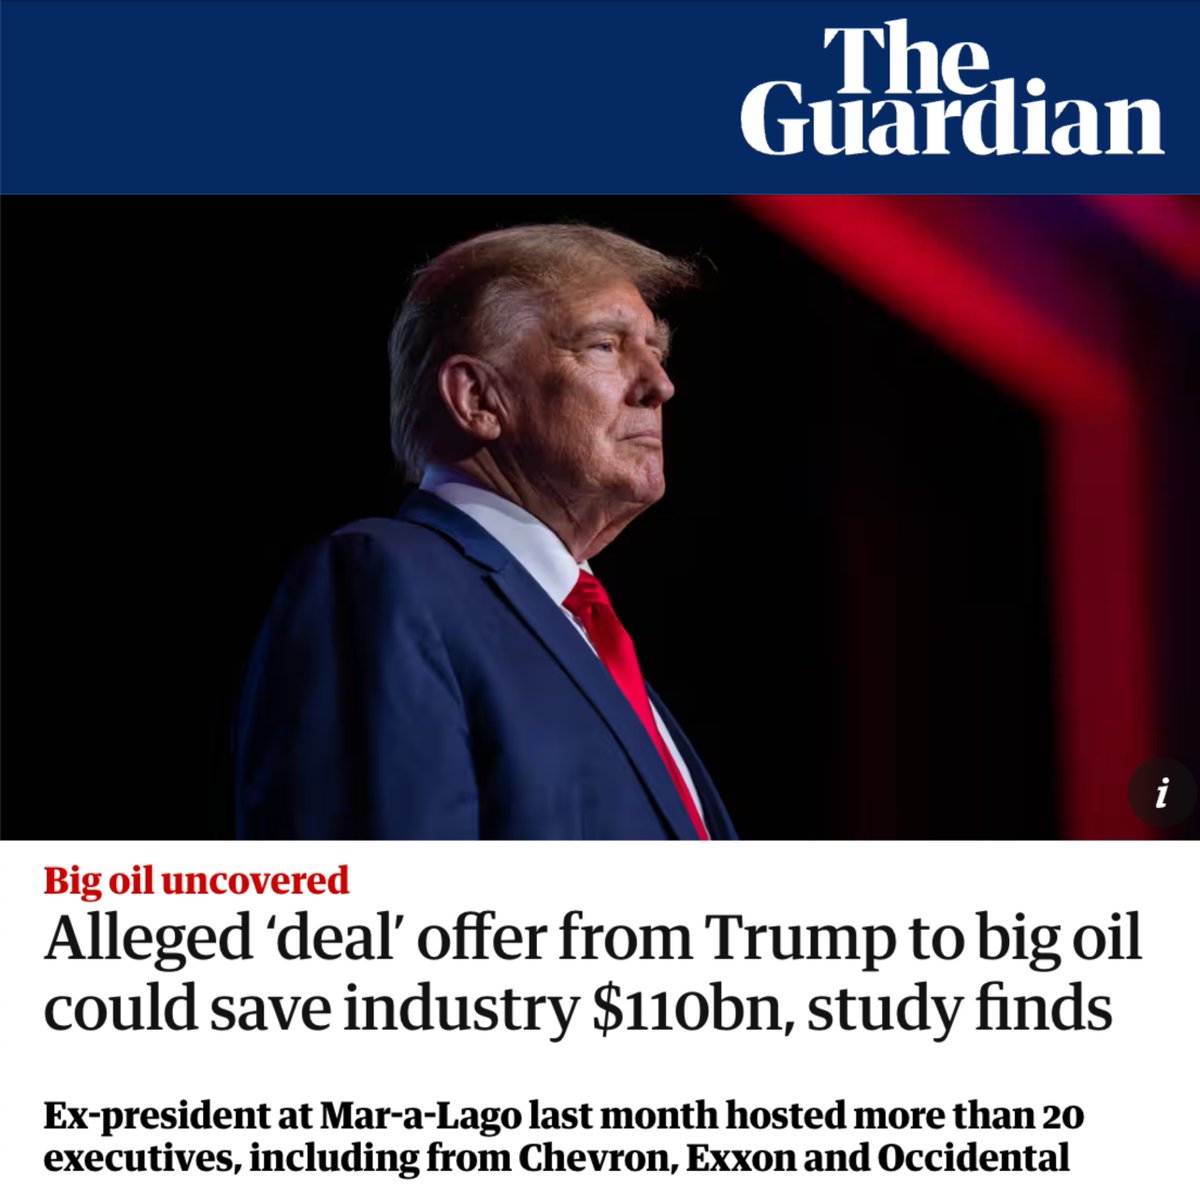 Isn't this an out-and-out bribe? And aren’t bribes illegal? The bottom line is that in Trump’s America, everything is for sale. Even the planet.